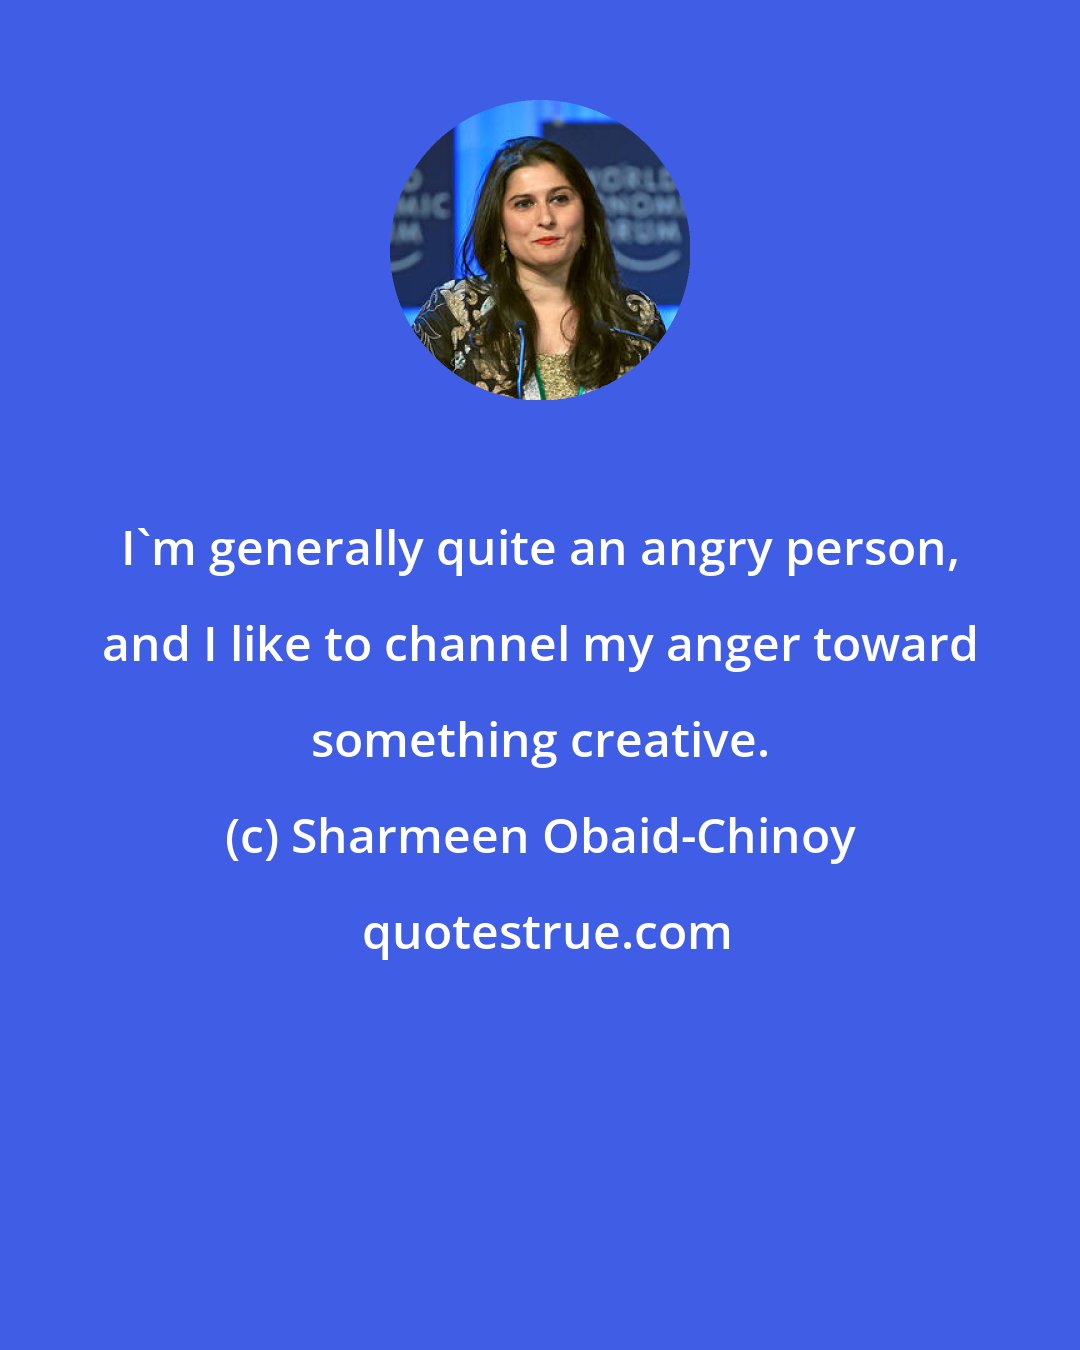 Sharmeen Obaid-Chinoy: I'm generally quite an angry person, and I like to channel my anger toward something creative.